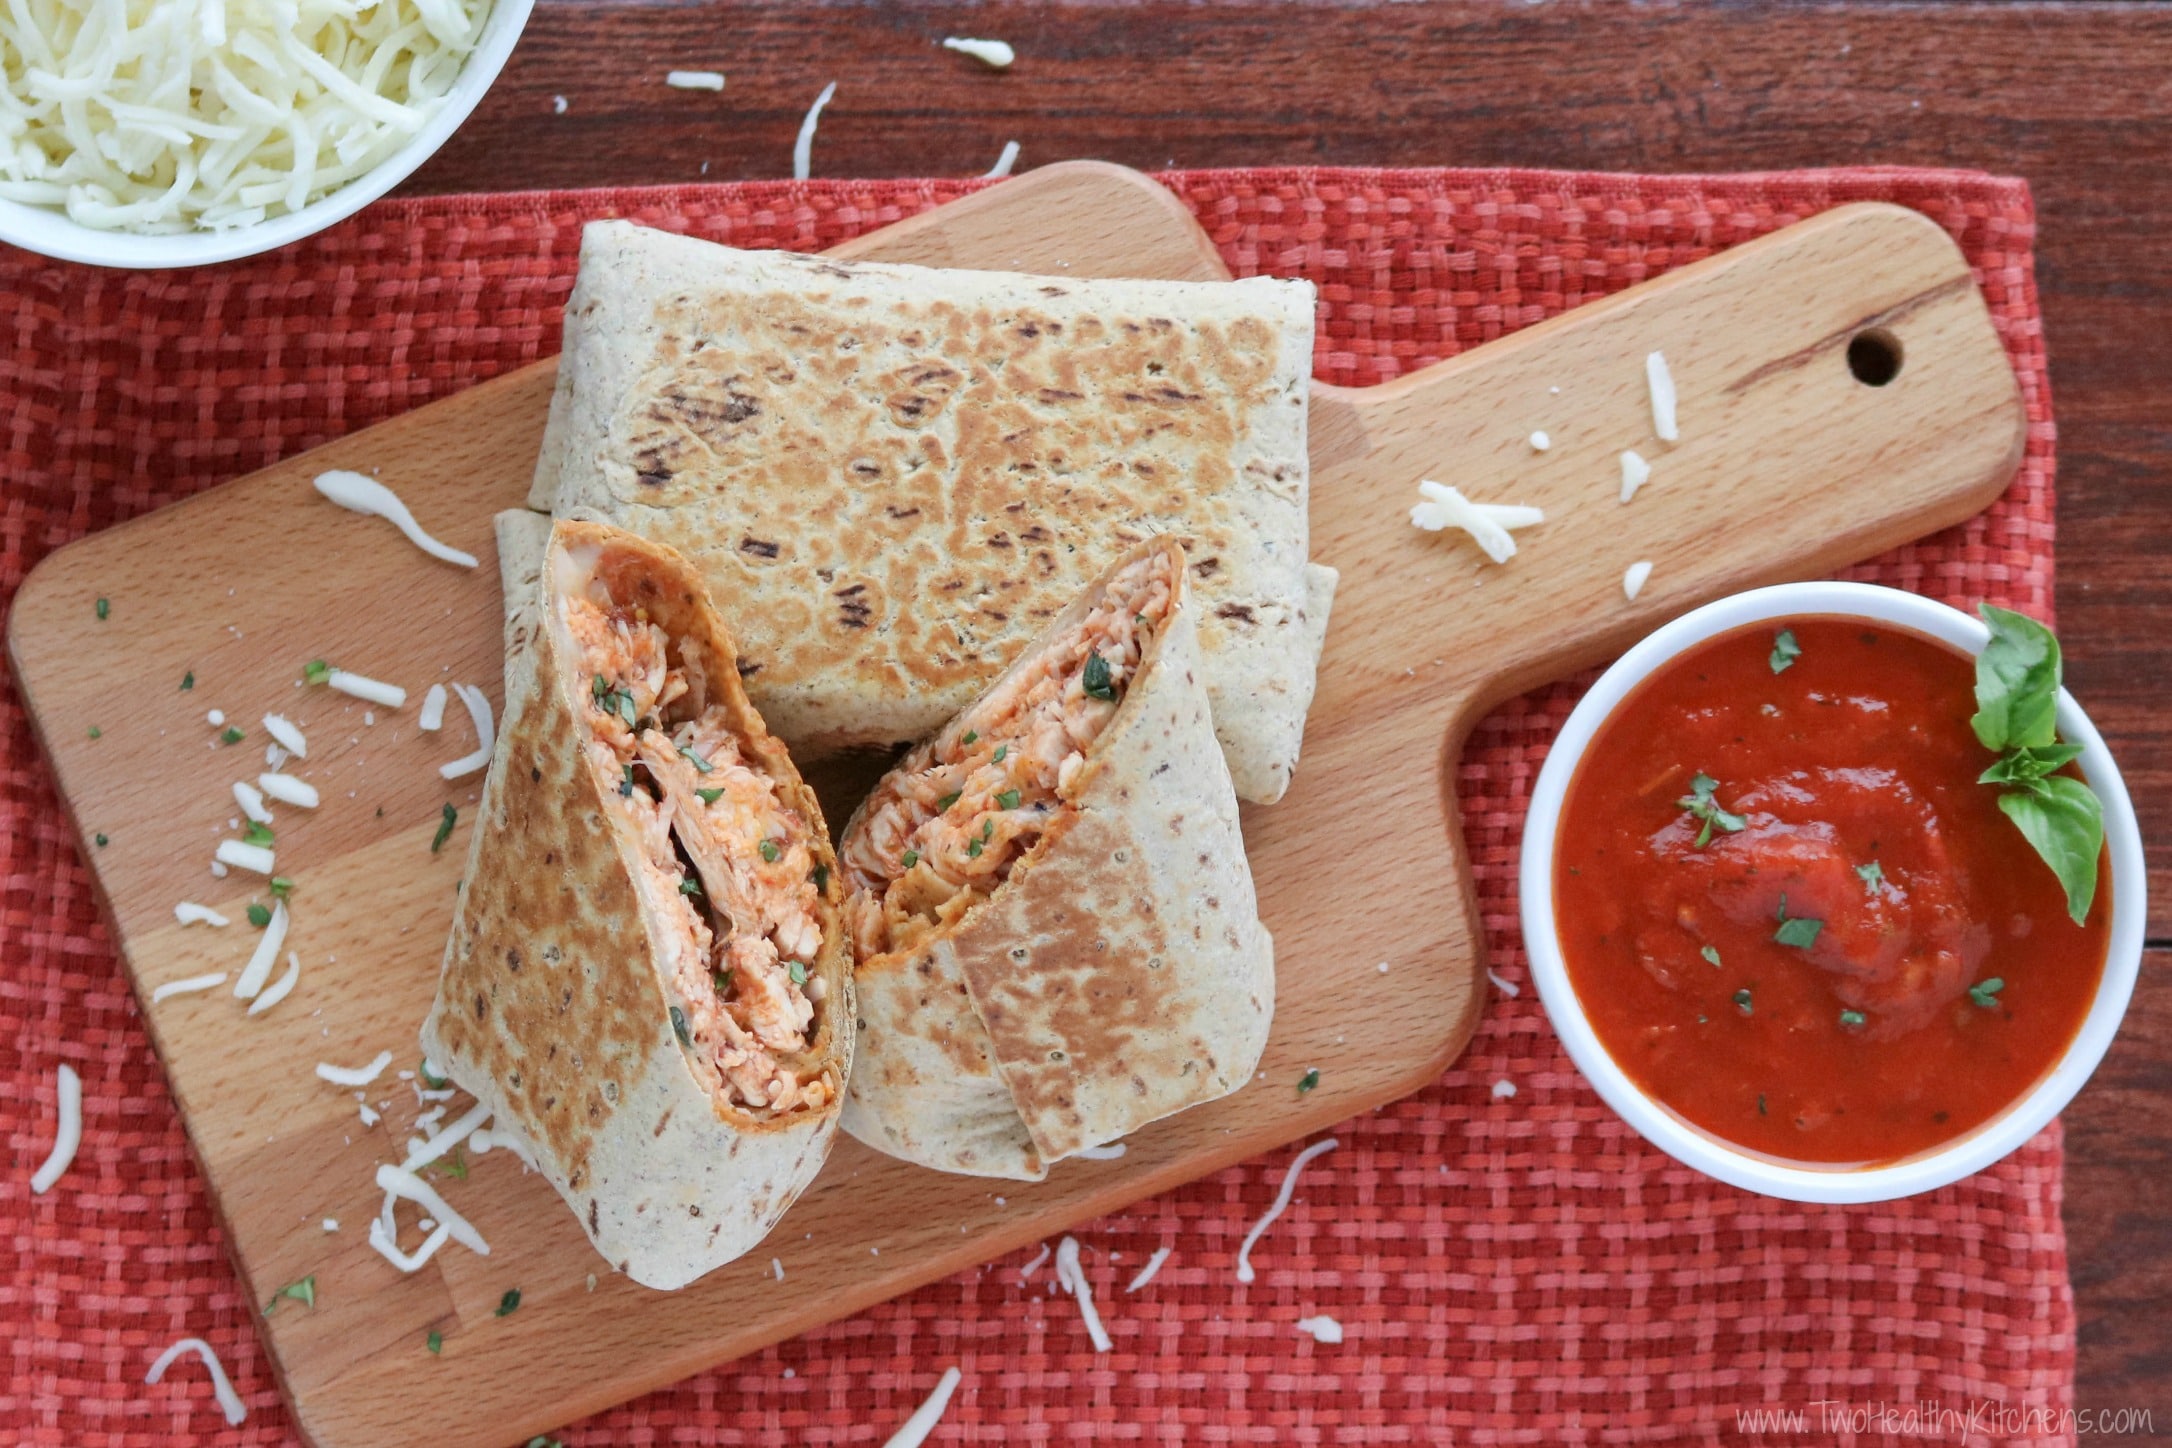 Two cooked wraps on wooden board, one whole and one cut open upright so you can see the chicken parmesan filling, with marinara and extra cheese alongside.